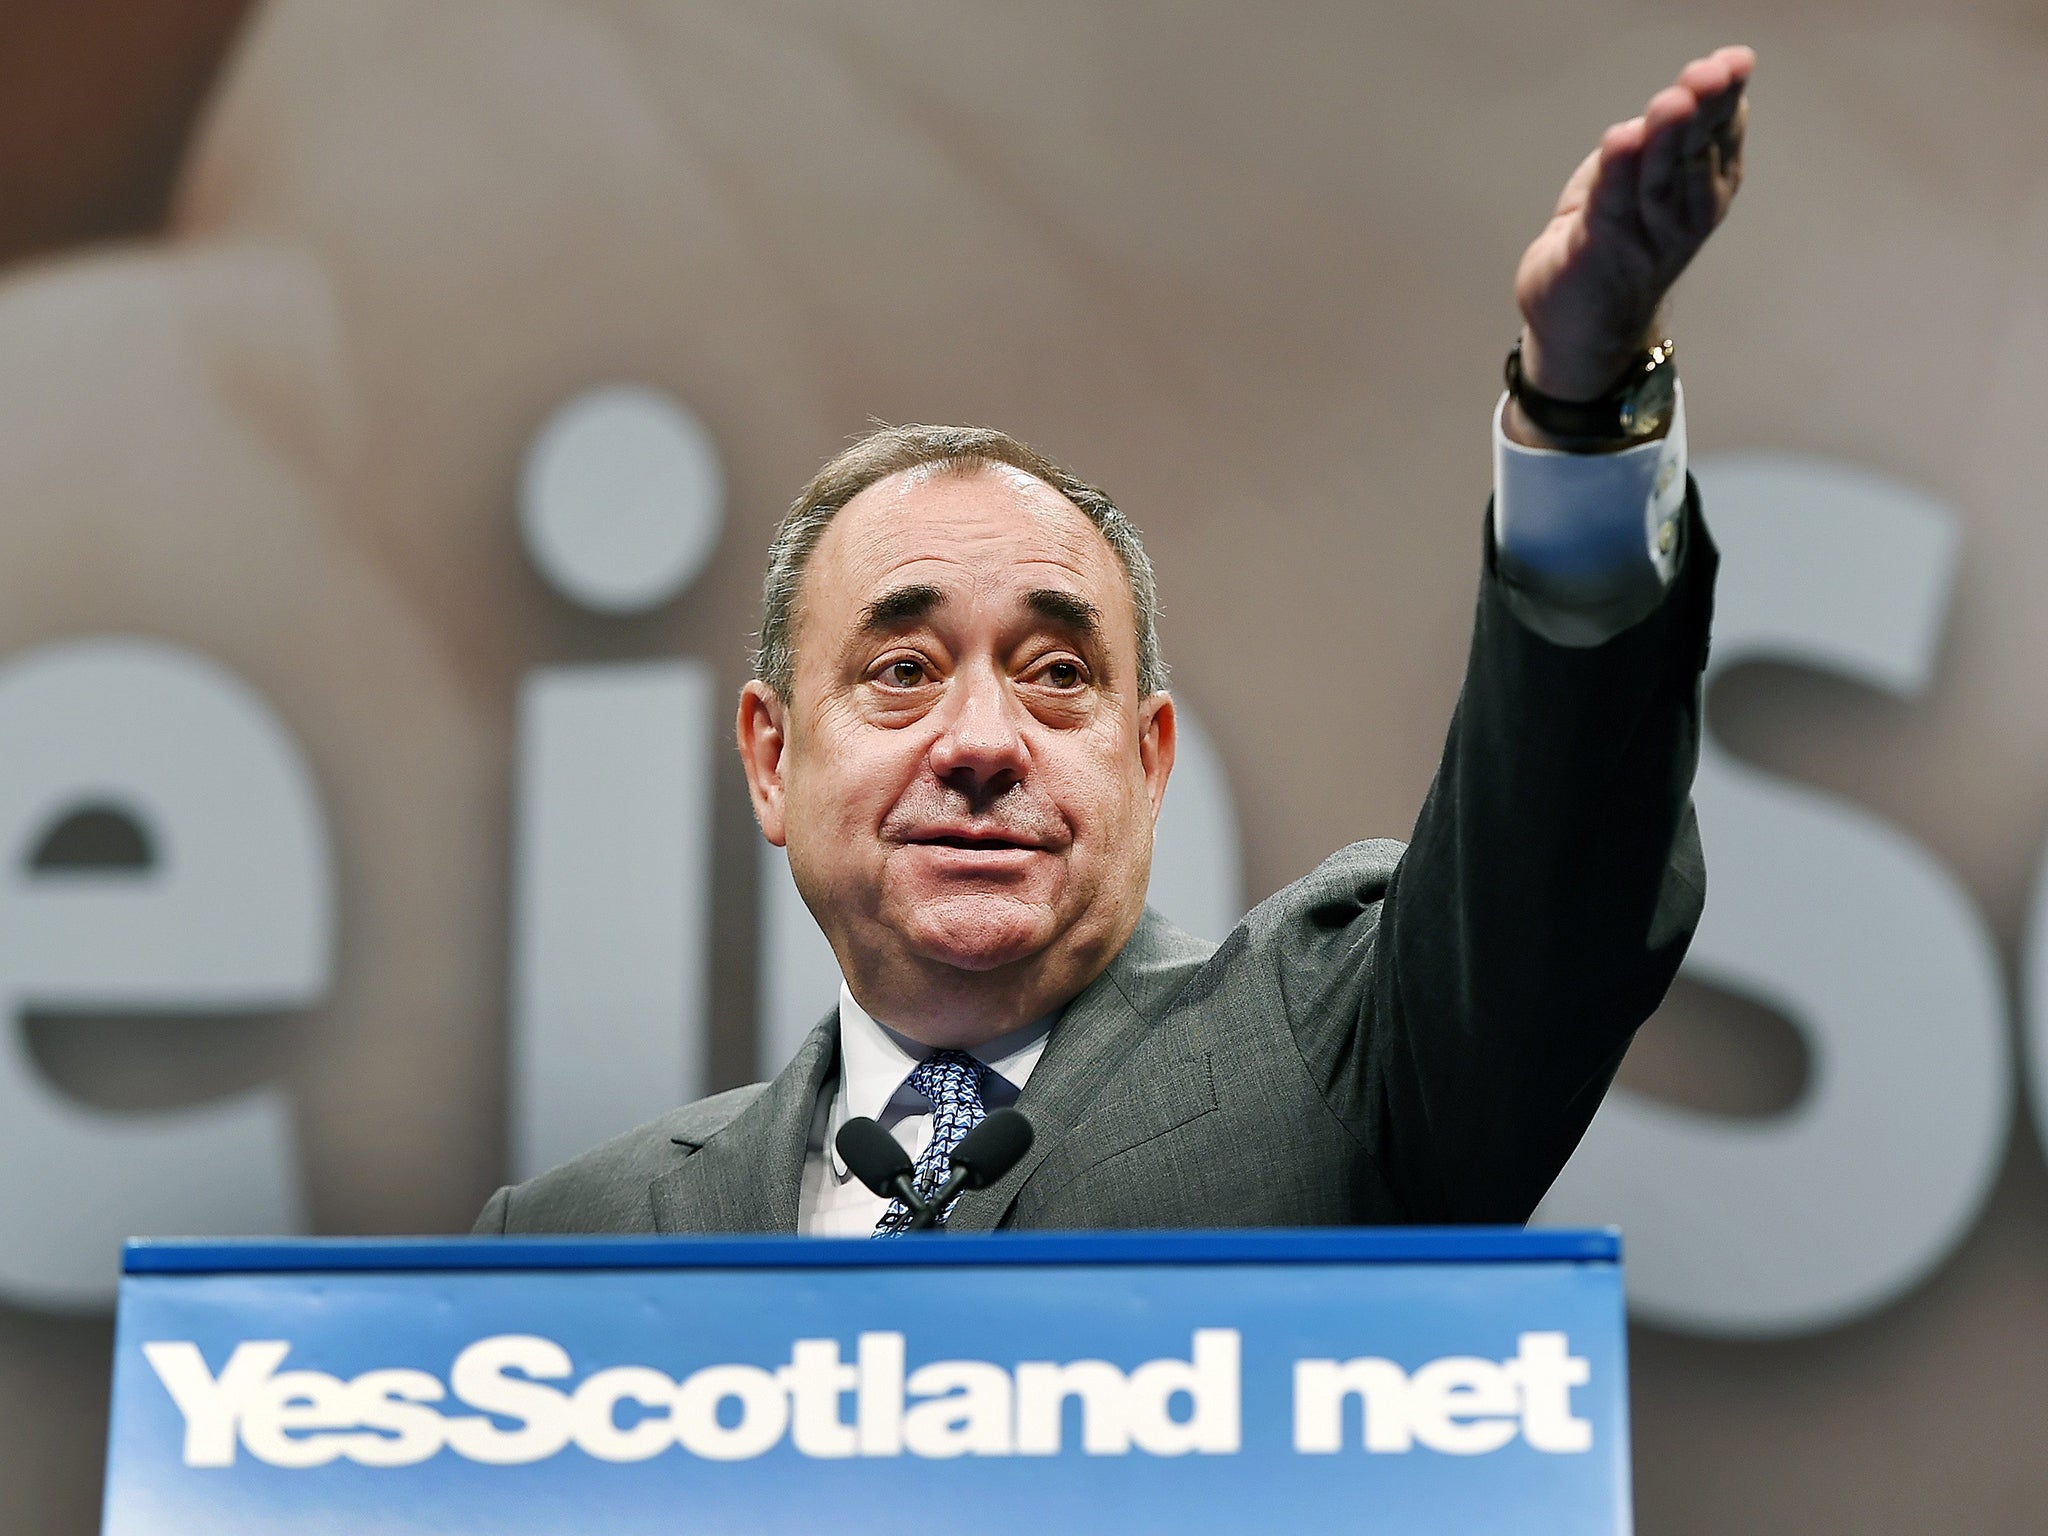 Alex Salmond and the nationalists reject claims that Scotland's economy would suffer if the UK broke up